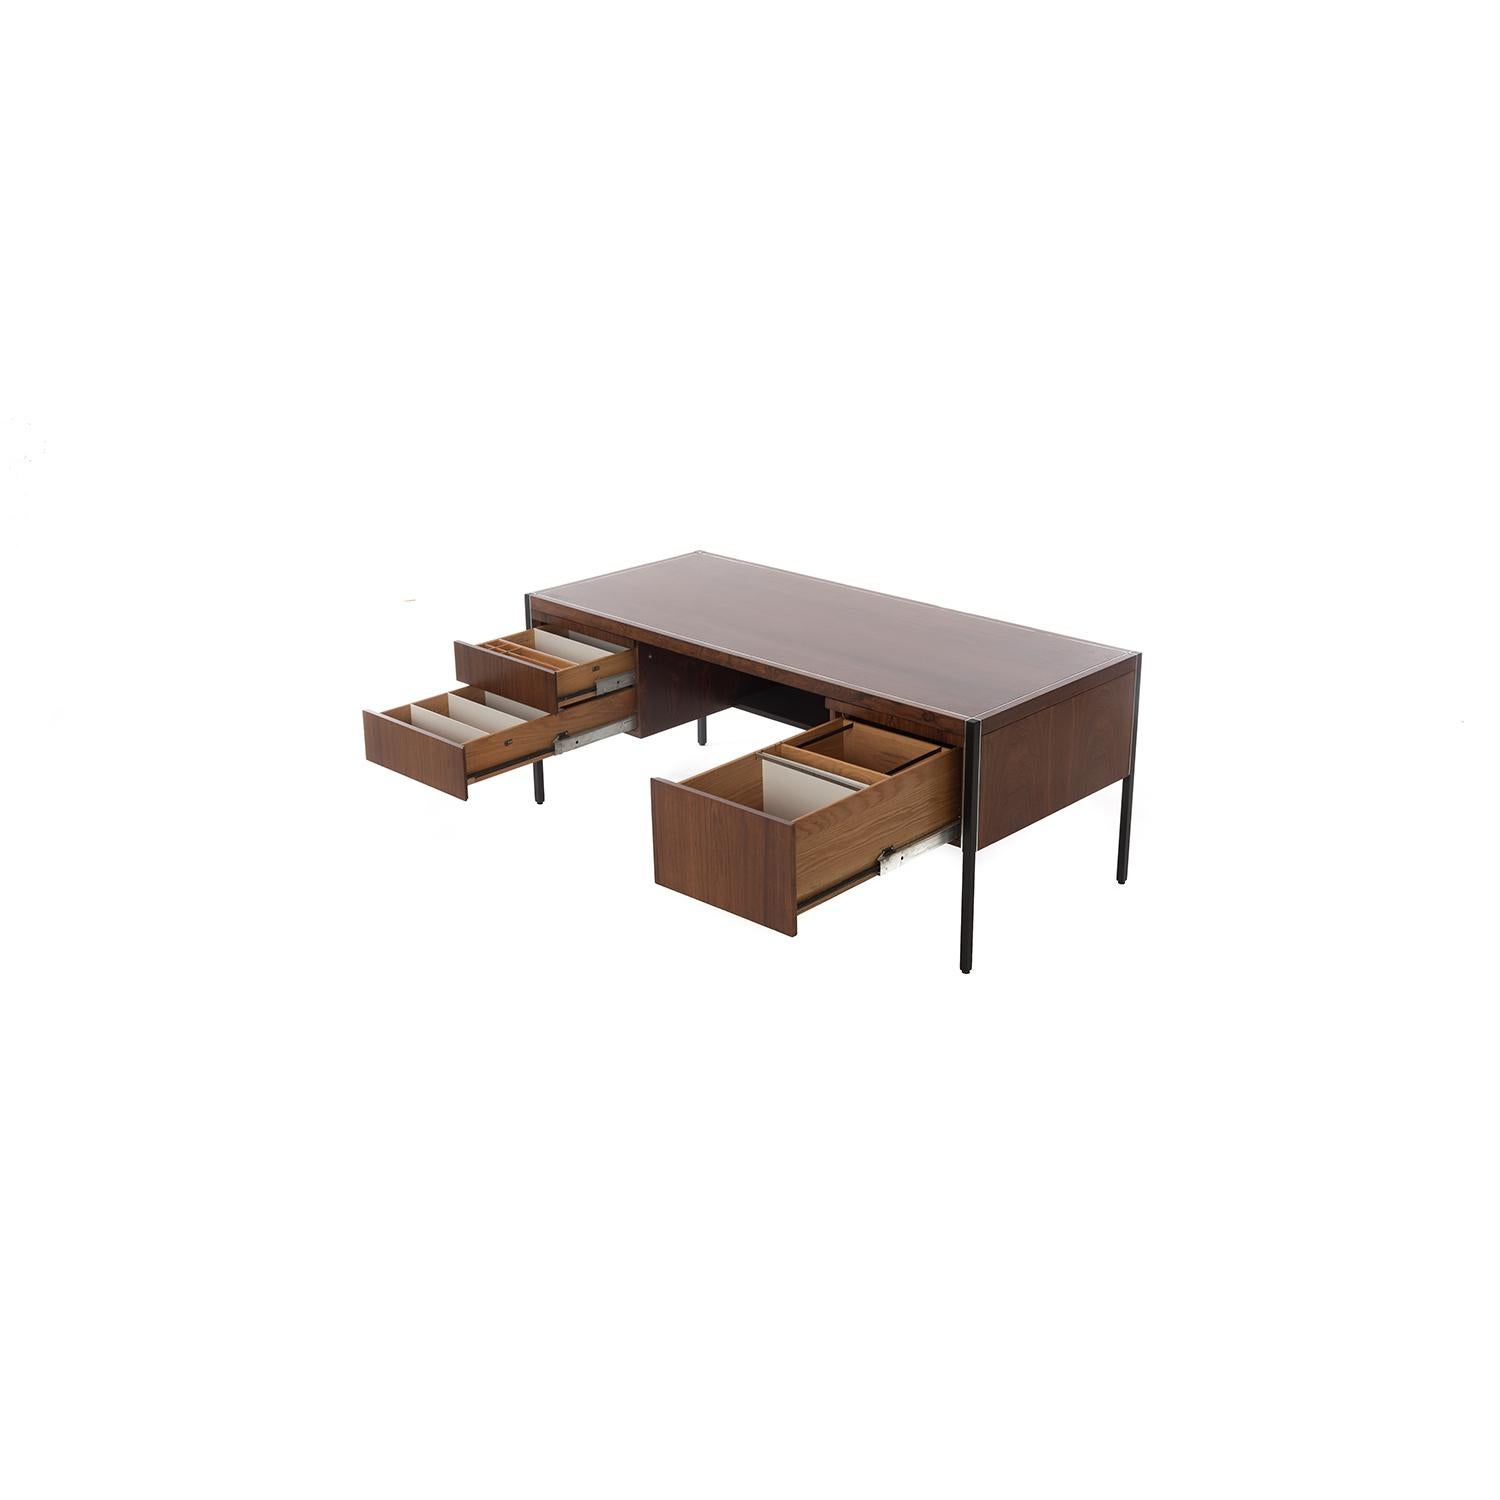 Steel Midcentury Executive Desk in Rosewood by Richard Schultz for Knoll